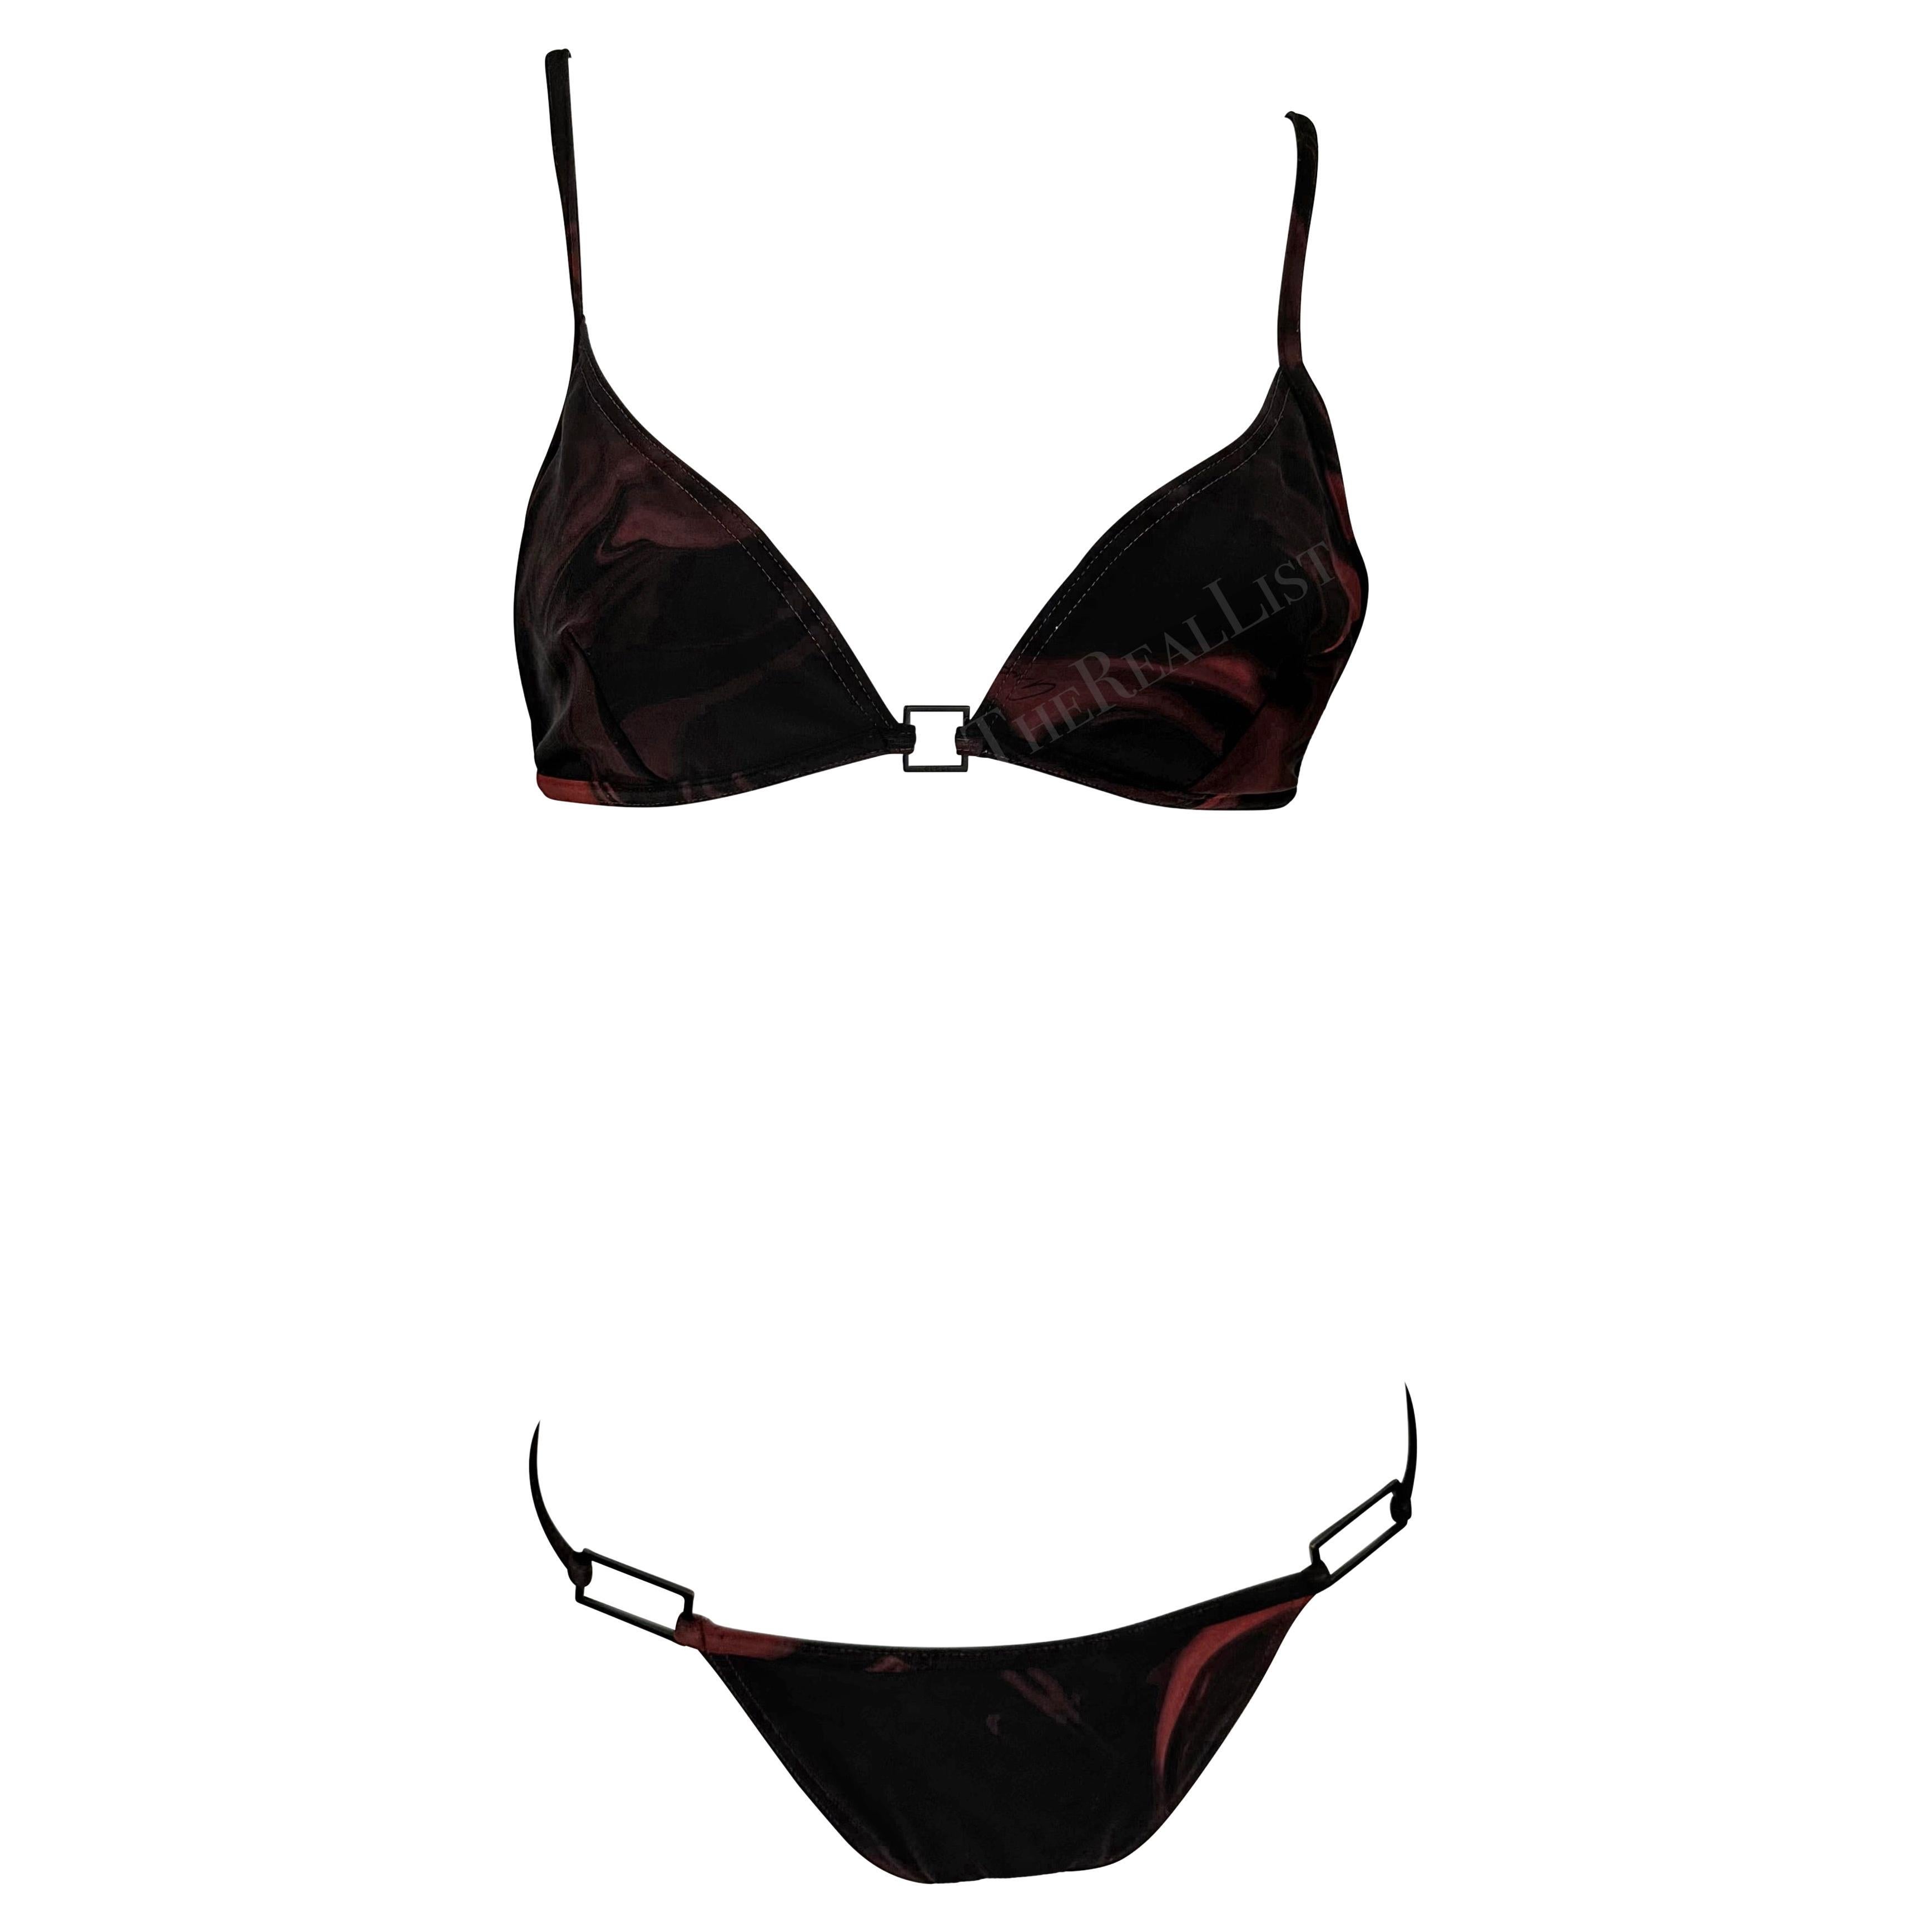 S/S 2001 Gucci by Tom Ford Black Red Magma Print Logo Buckle Bikini Two-Pieces en vente